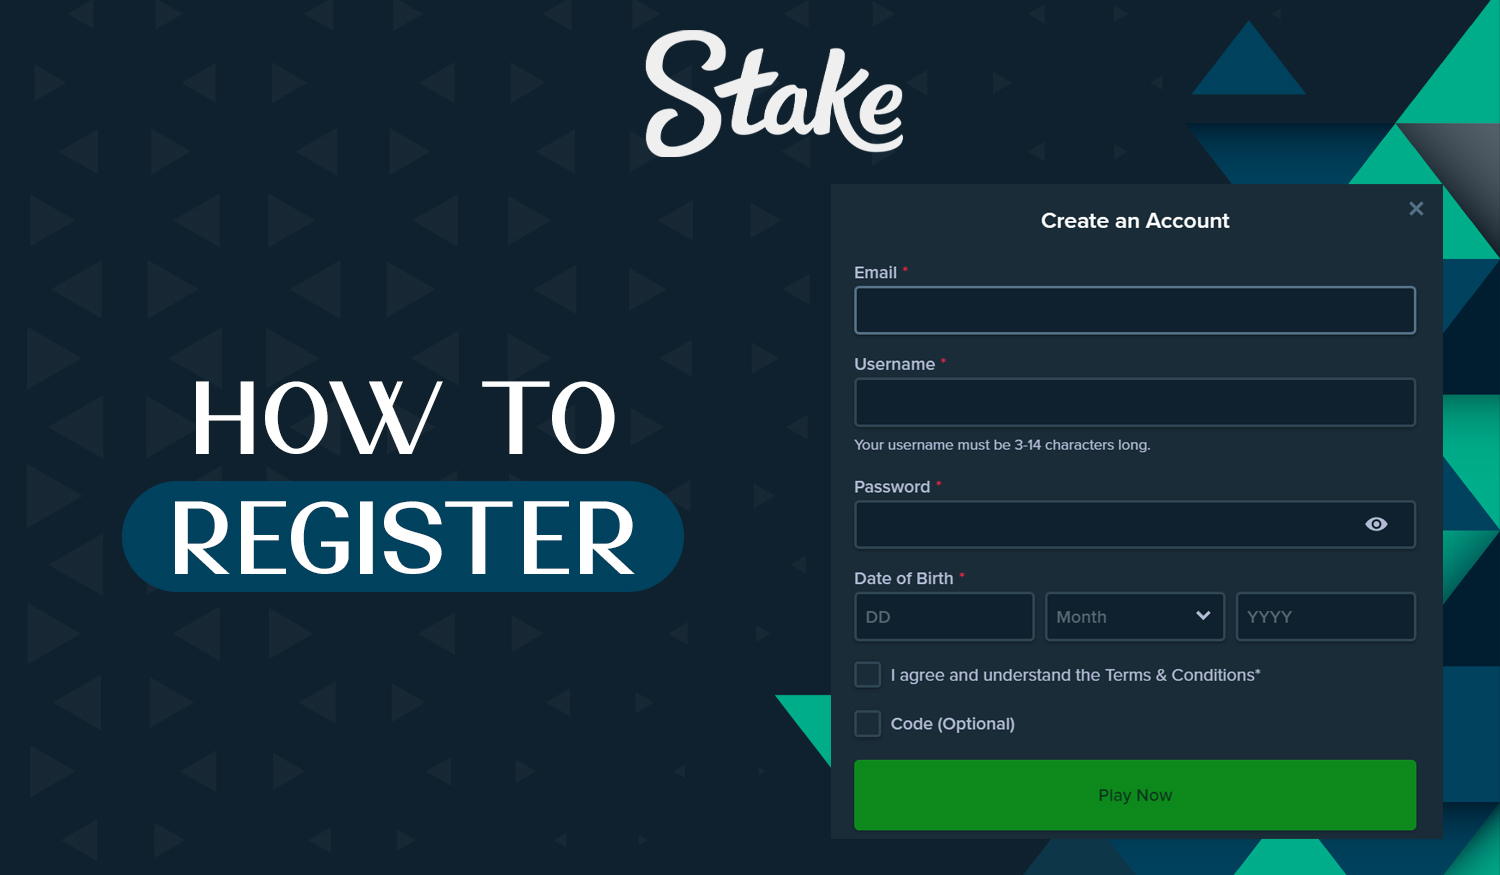 Step-by-step instructions for Indian users on how to register a new Stake account